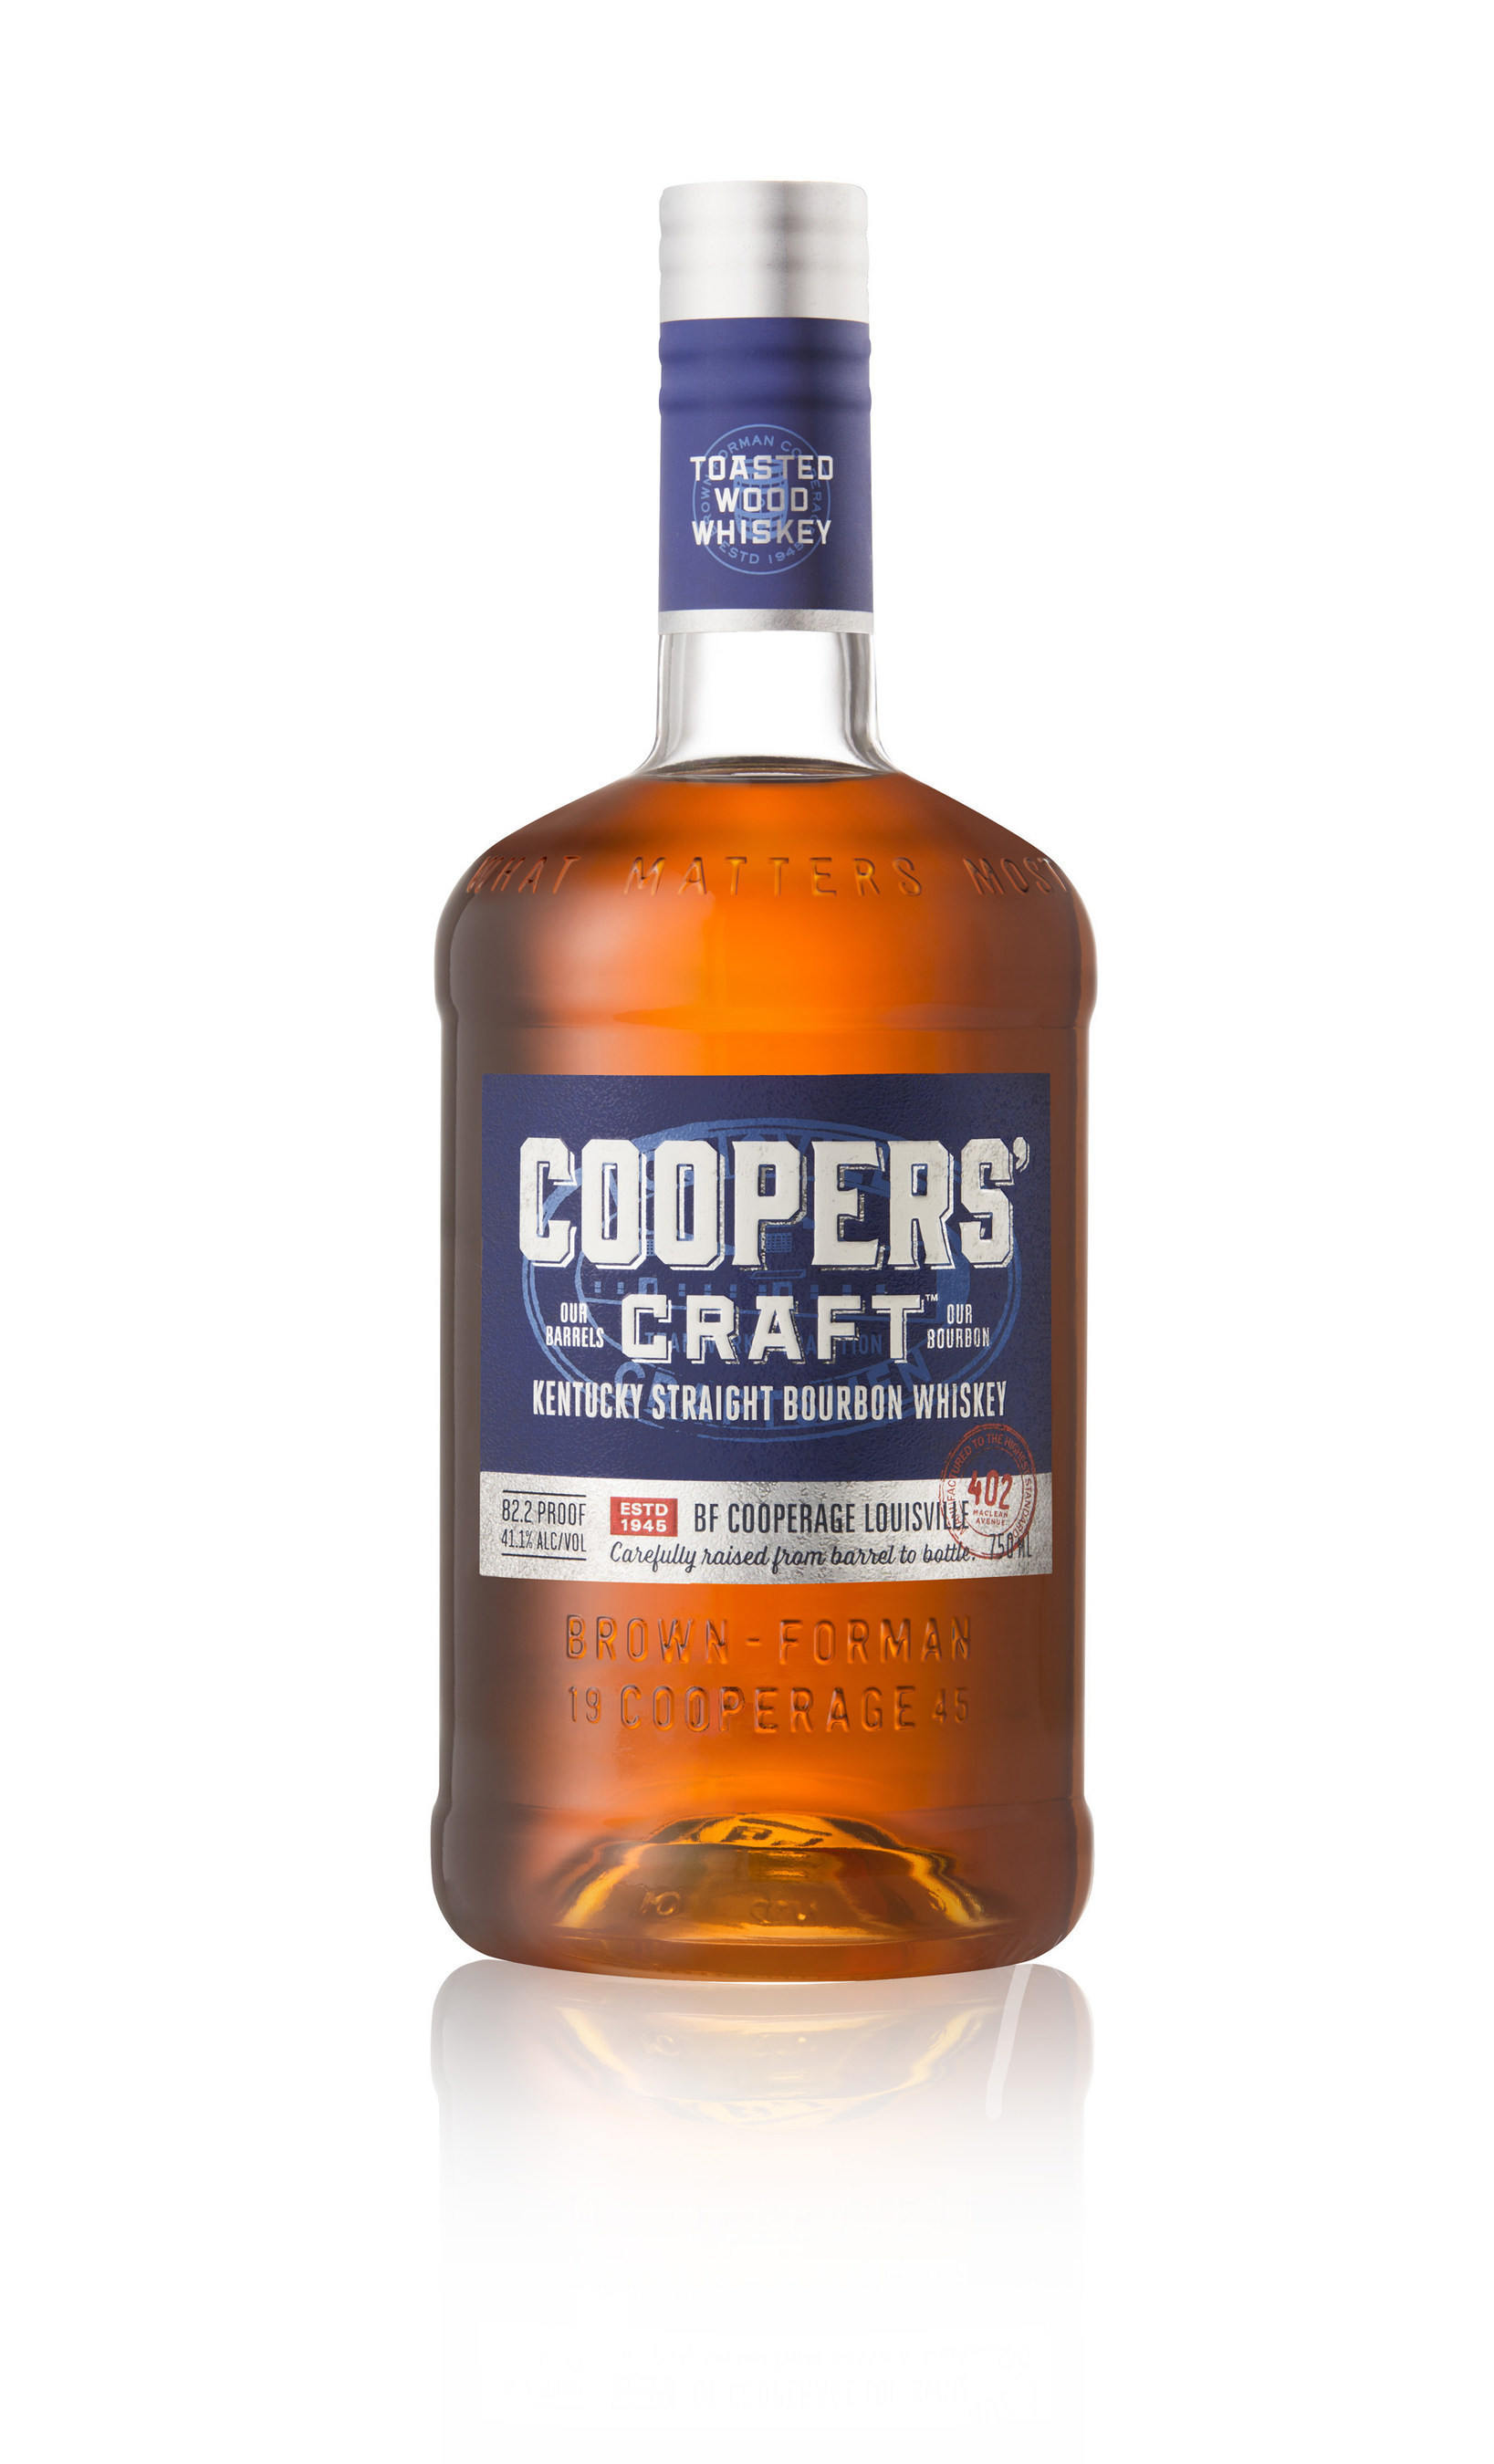 Coopers' Craft, Brown-Forman's first new bourbon in 20 years, will be available in select markets this summer and celebrates the company's more than 70 years of barrel-making and wood expertise.